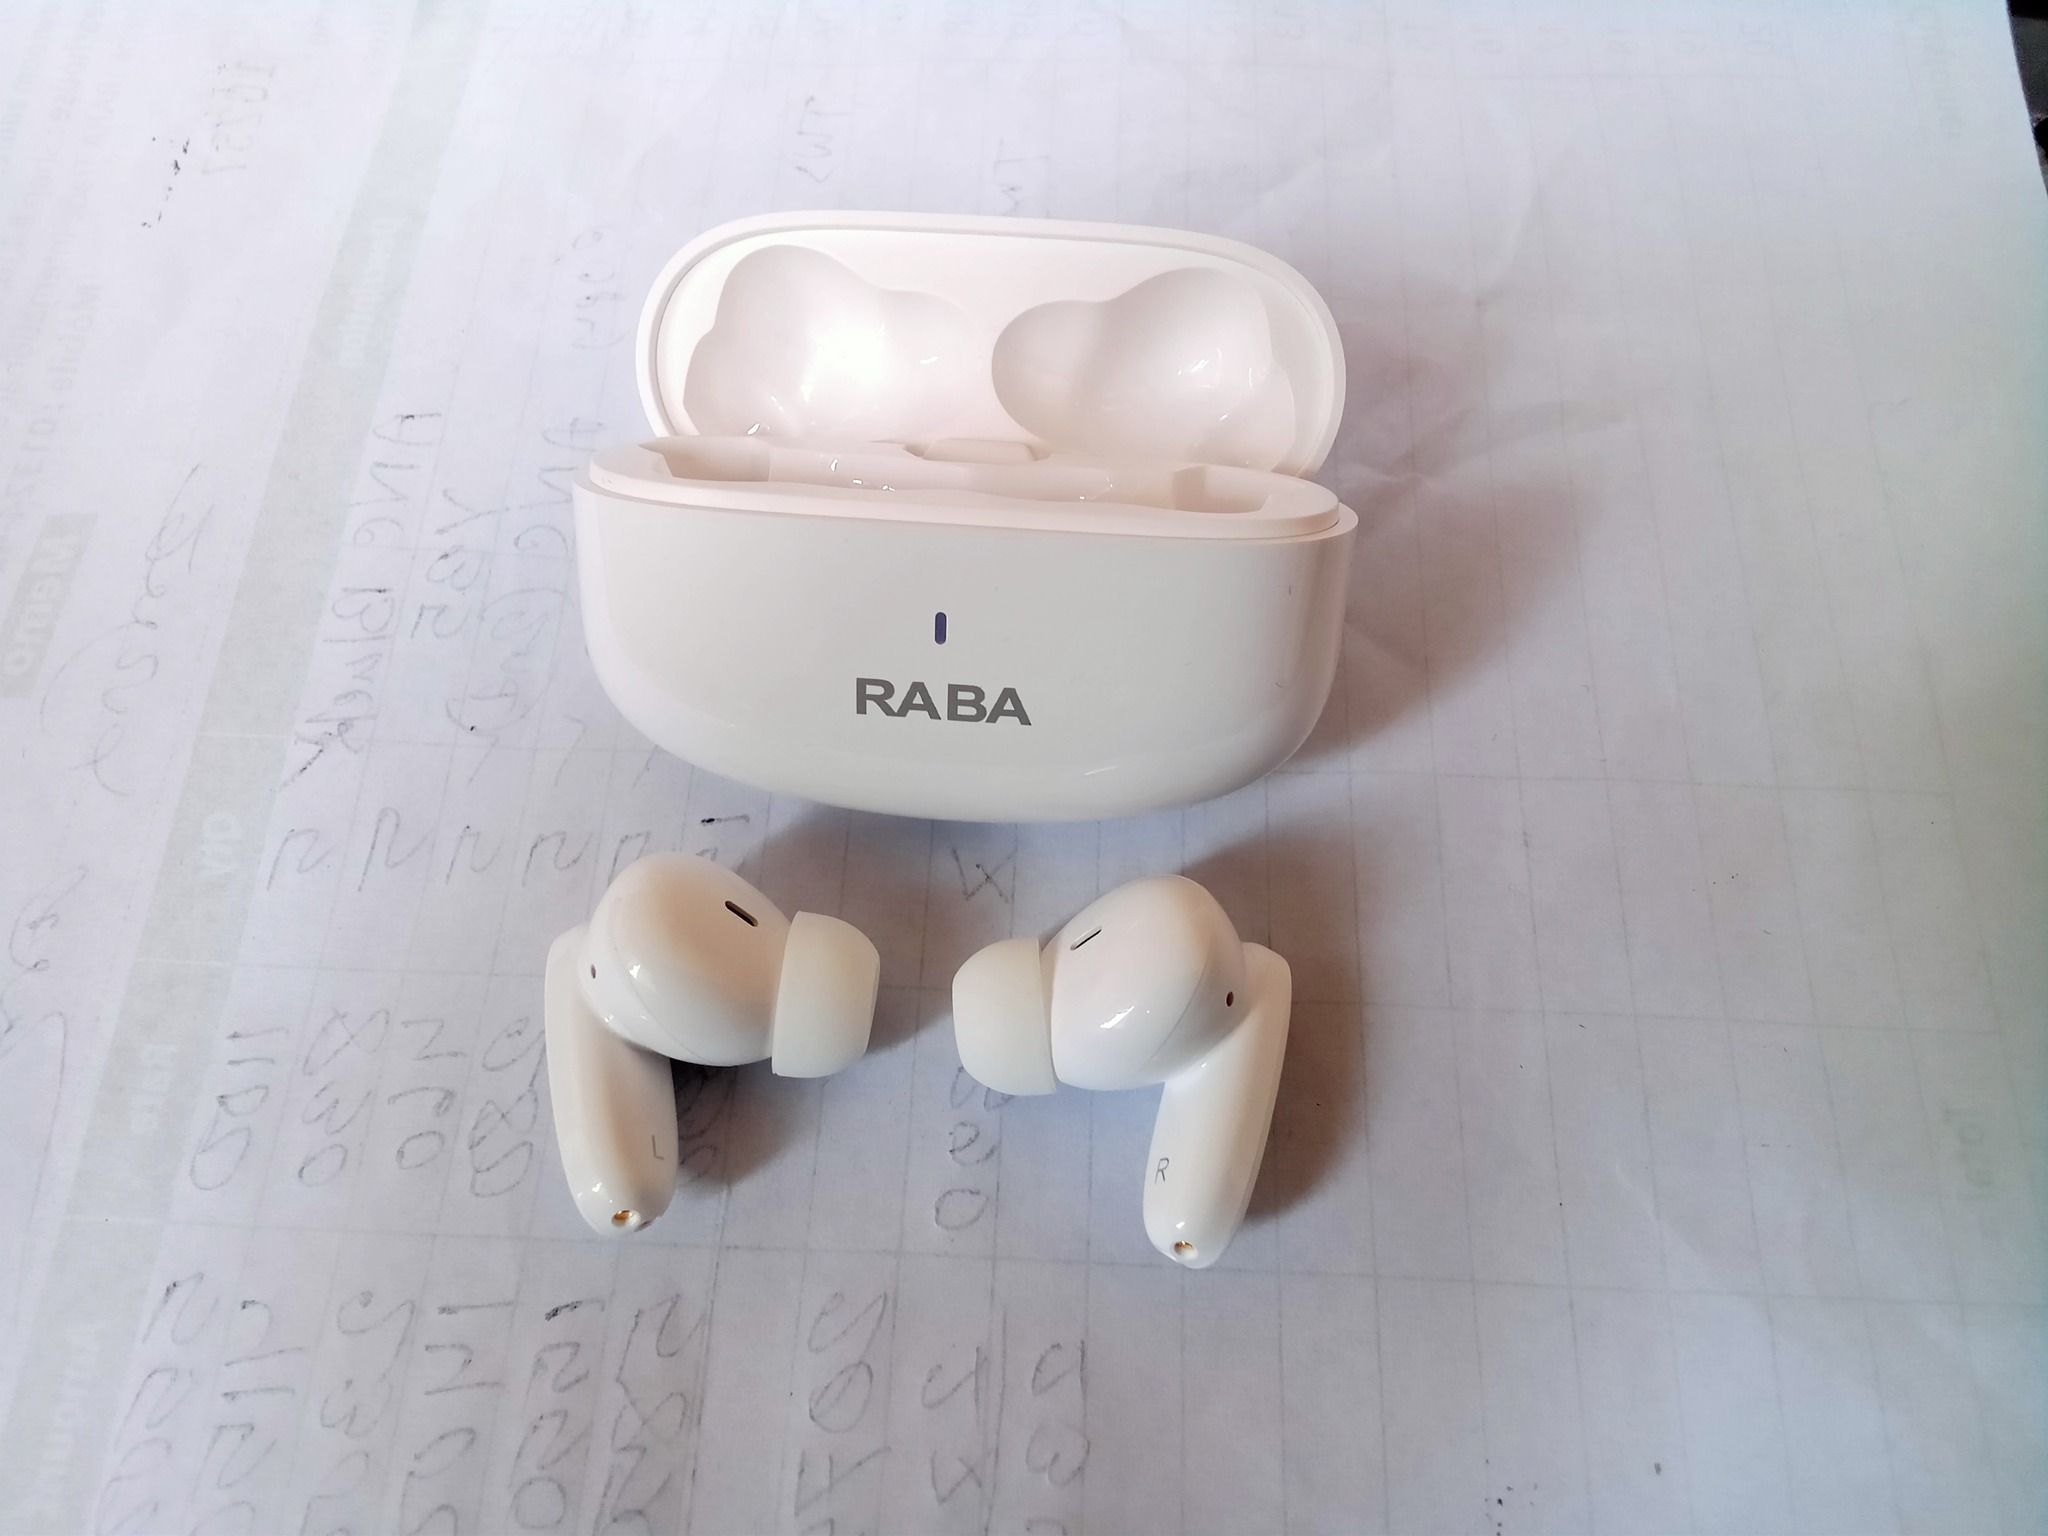 Raba S99 TWS Earbuds - 10-Hour Playback, Unique Design, Free Delivery